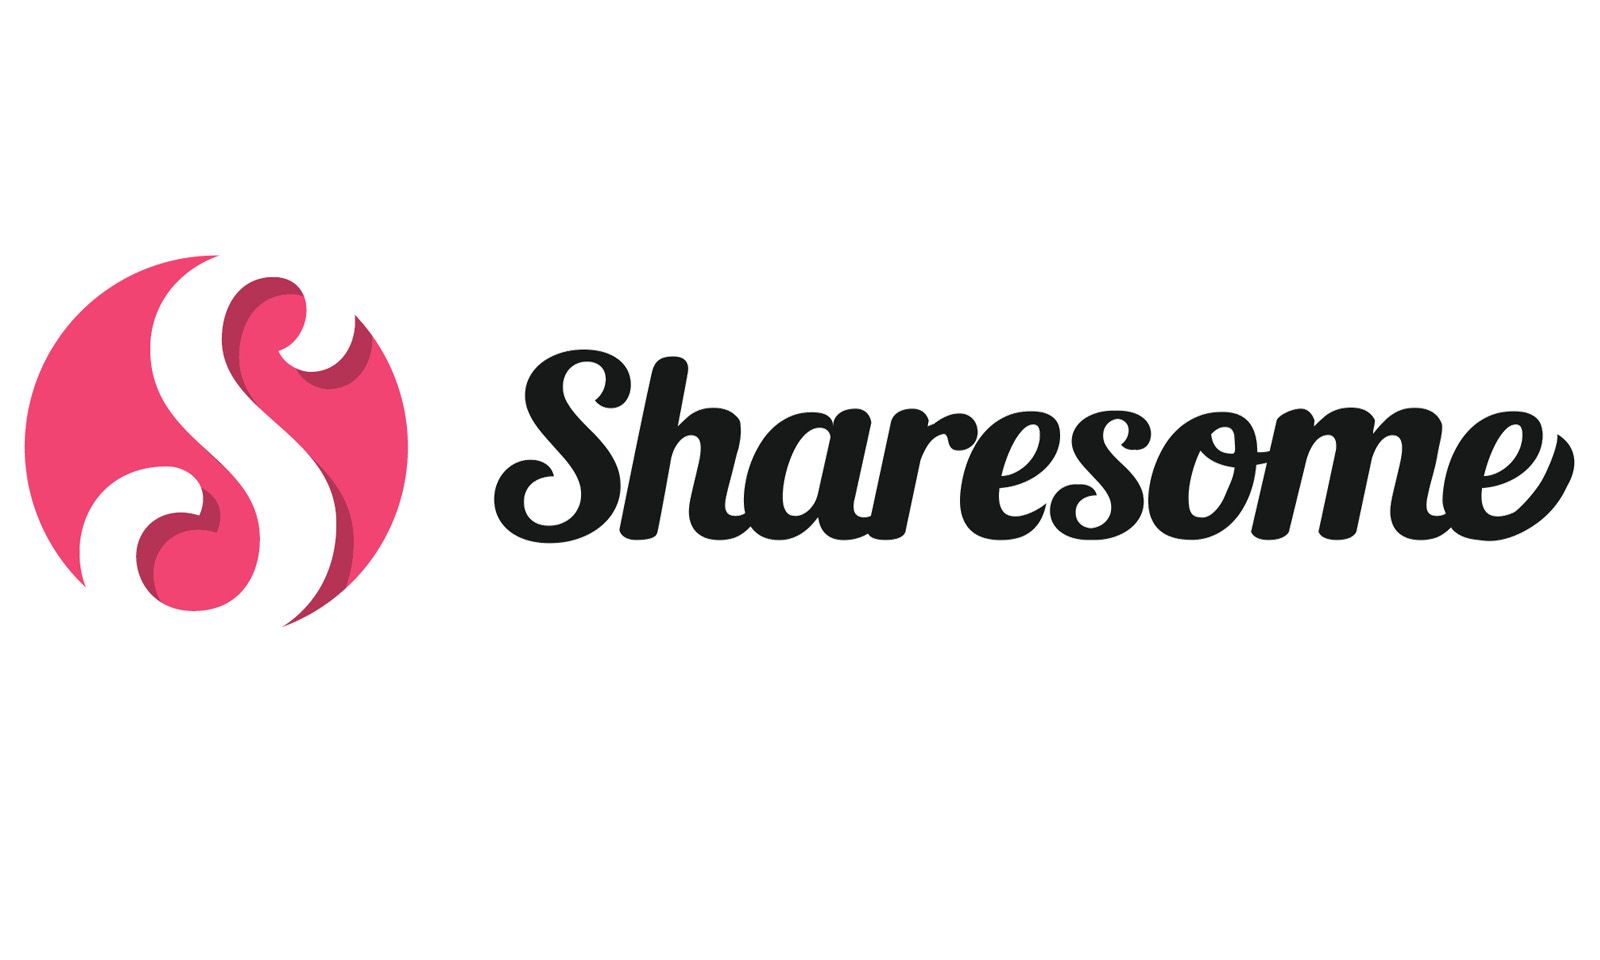 New Adult-Friendly Social Network Sharesome Launches in Beta